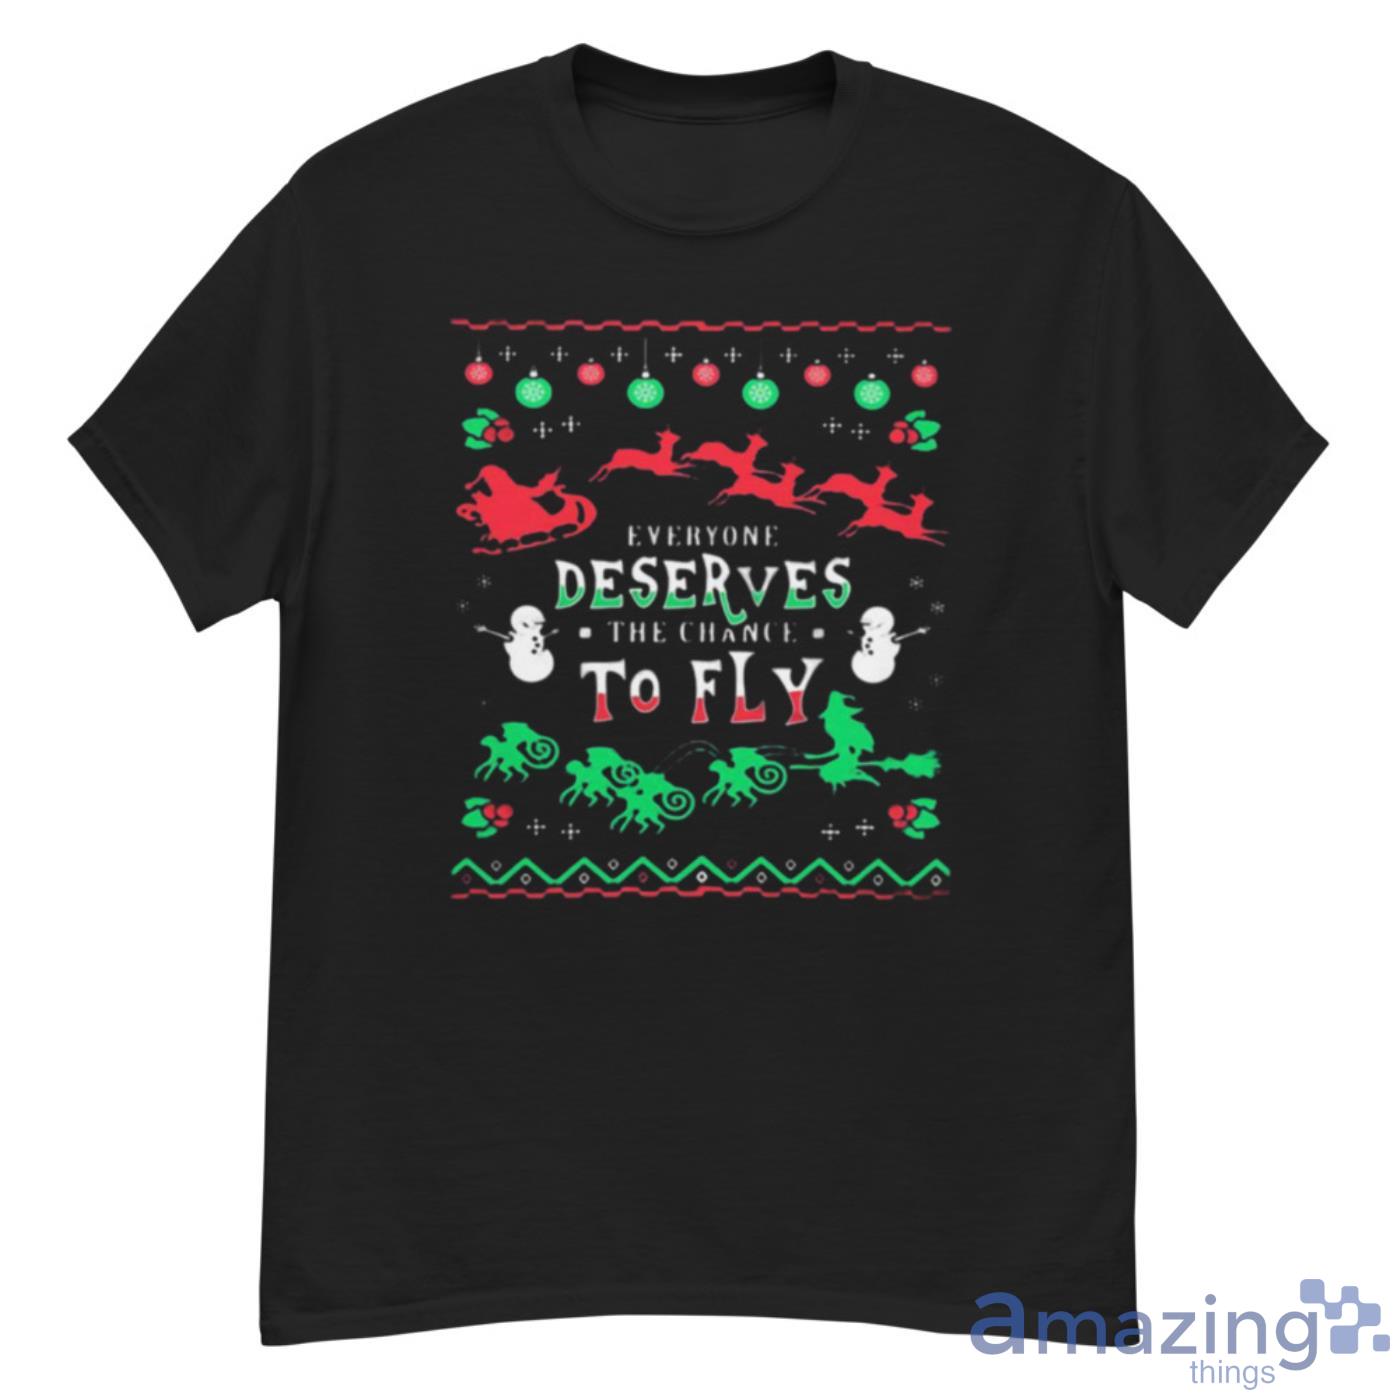 Everyone Deserves The Chance To Fly Christmas Shirt - G500 Men’s Classic T-Shirt